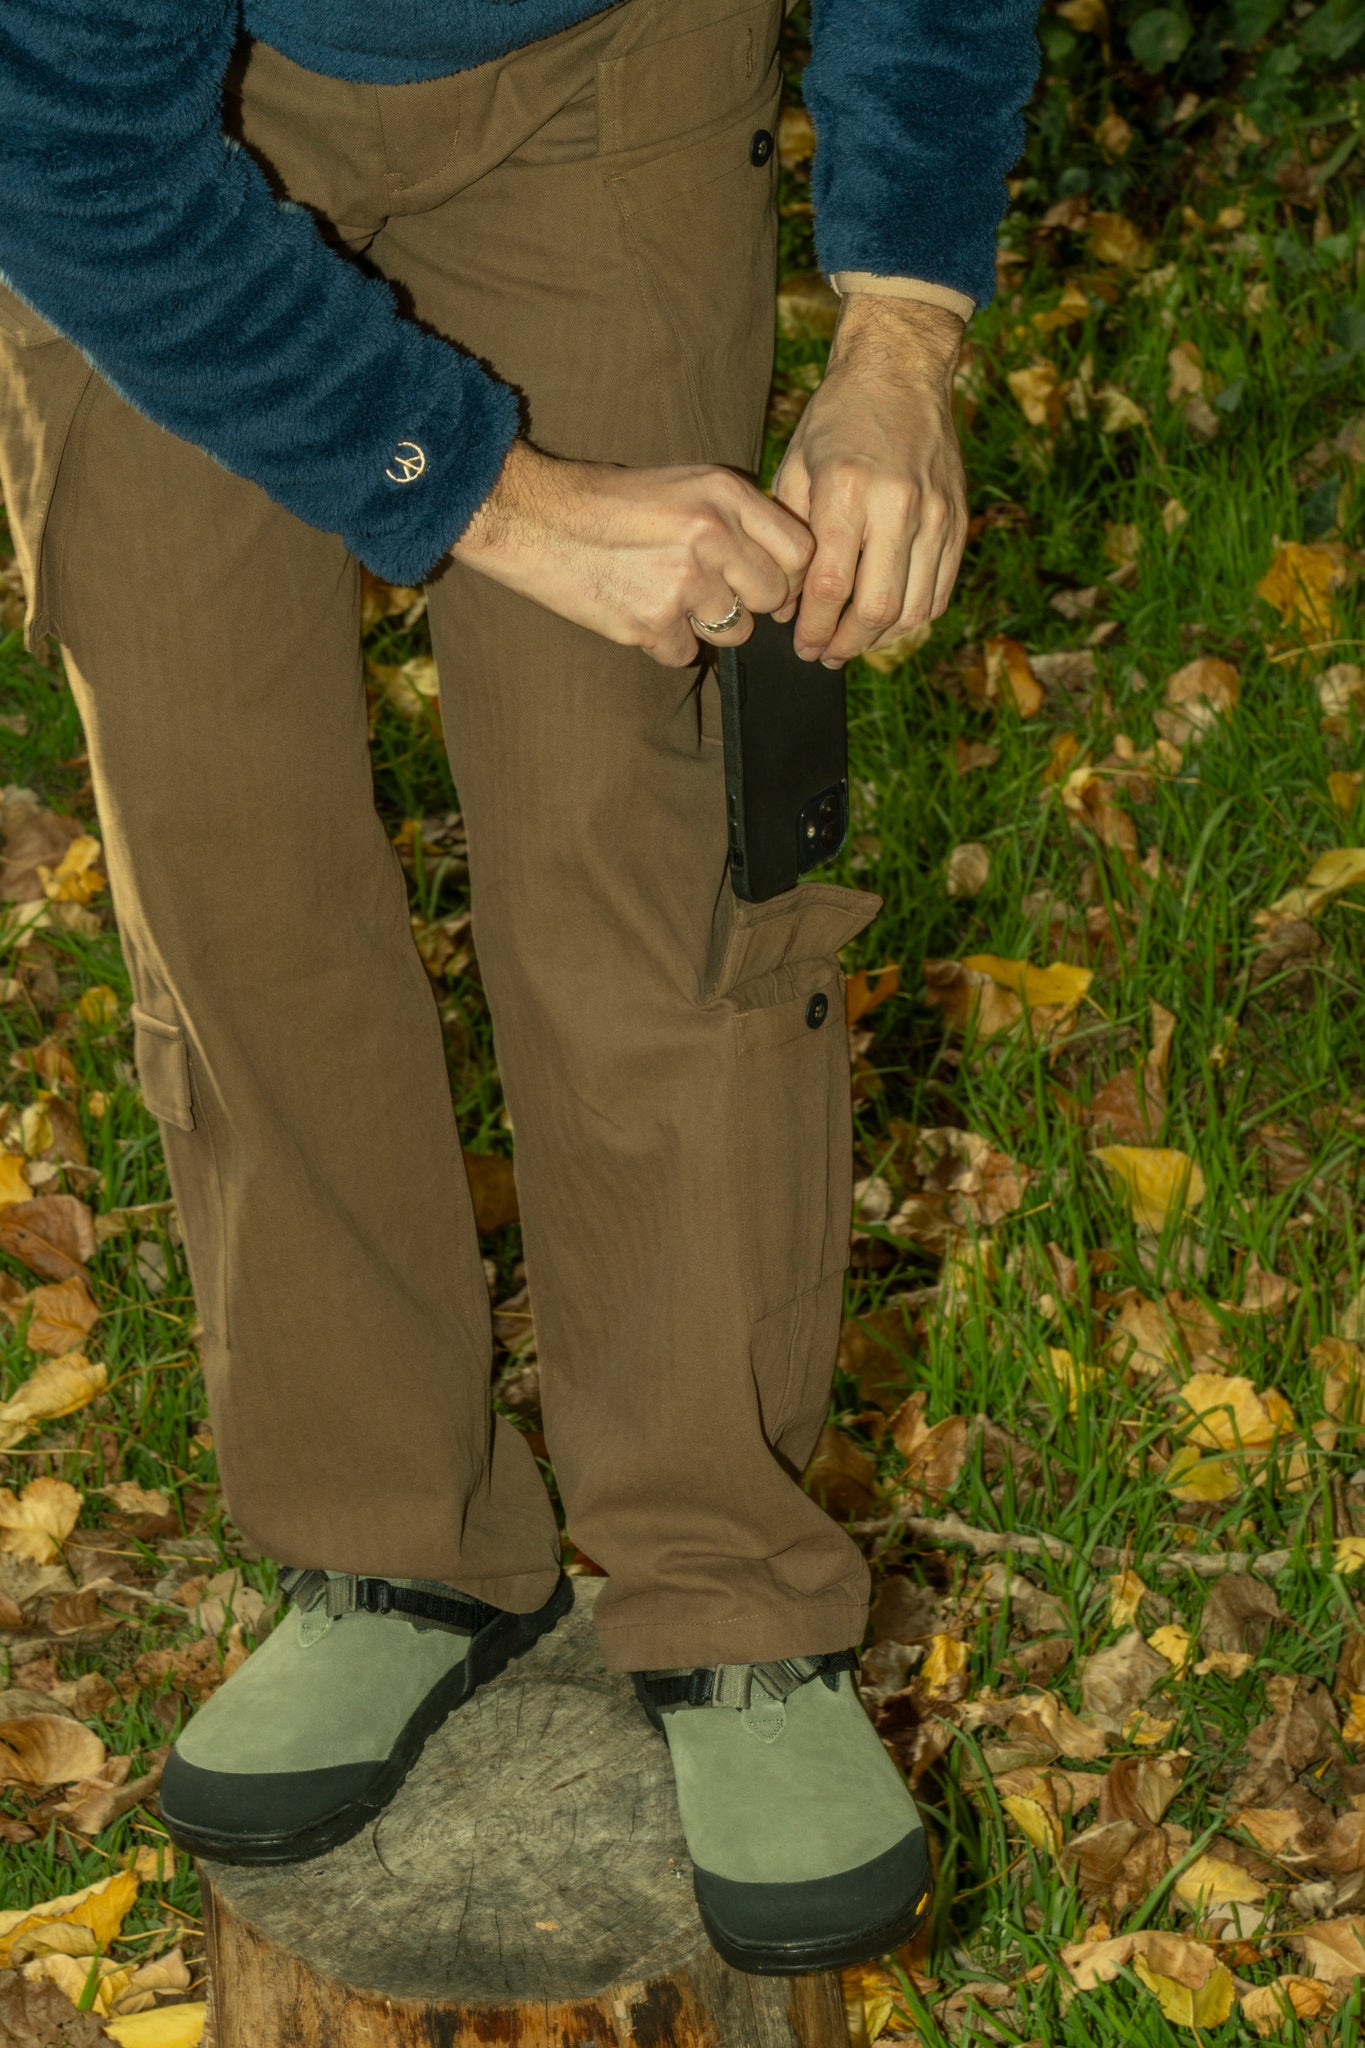 SEX HIPPIES - CARGO PANT IN BROWN